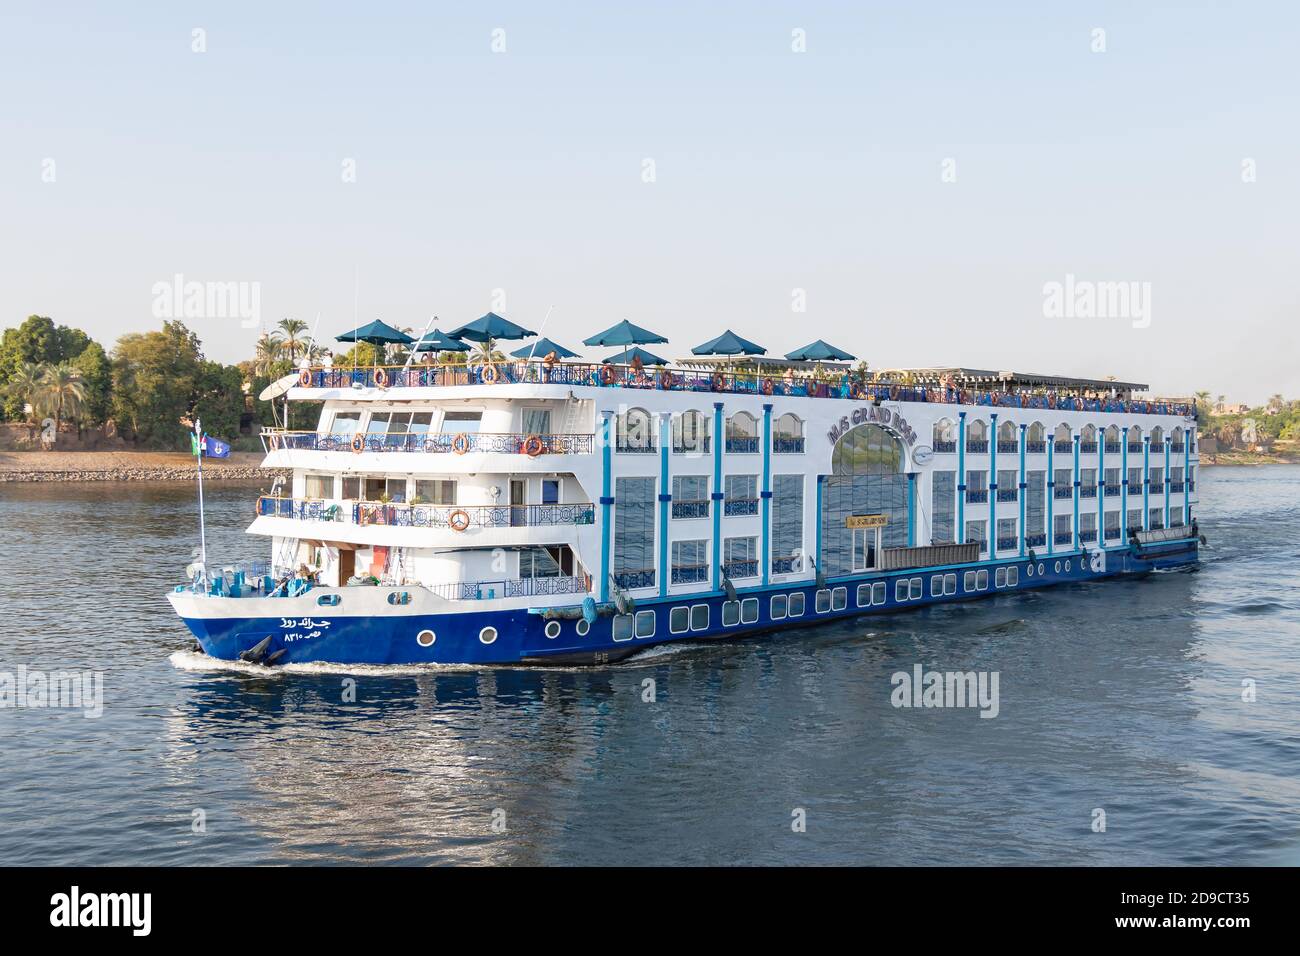 Aswan, Egypt - September 16, 2018: Floating hotel (tourist boat) motor down the River Nile towards Aswan in central Egypt. The tourist boats cruise be Stock Photo